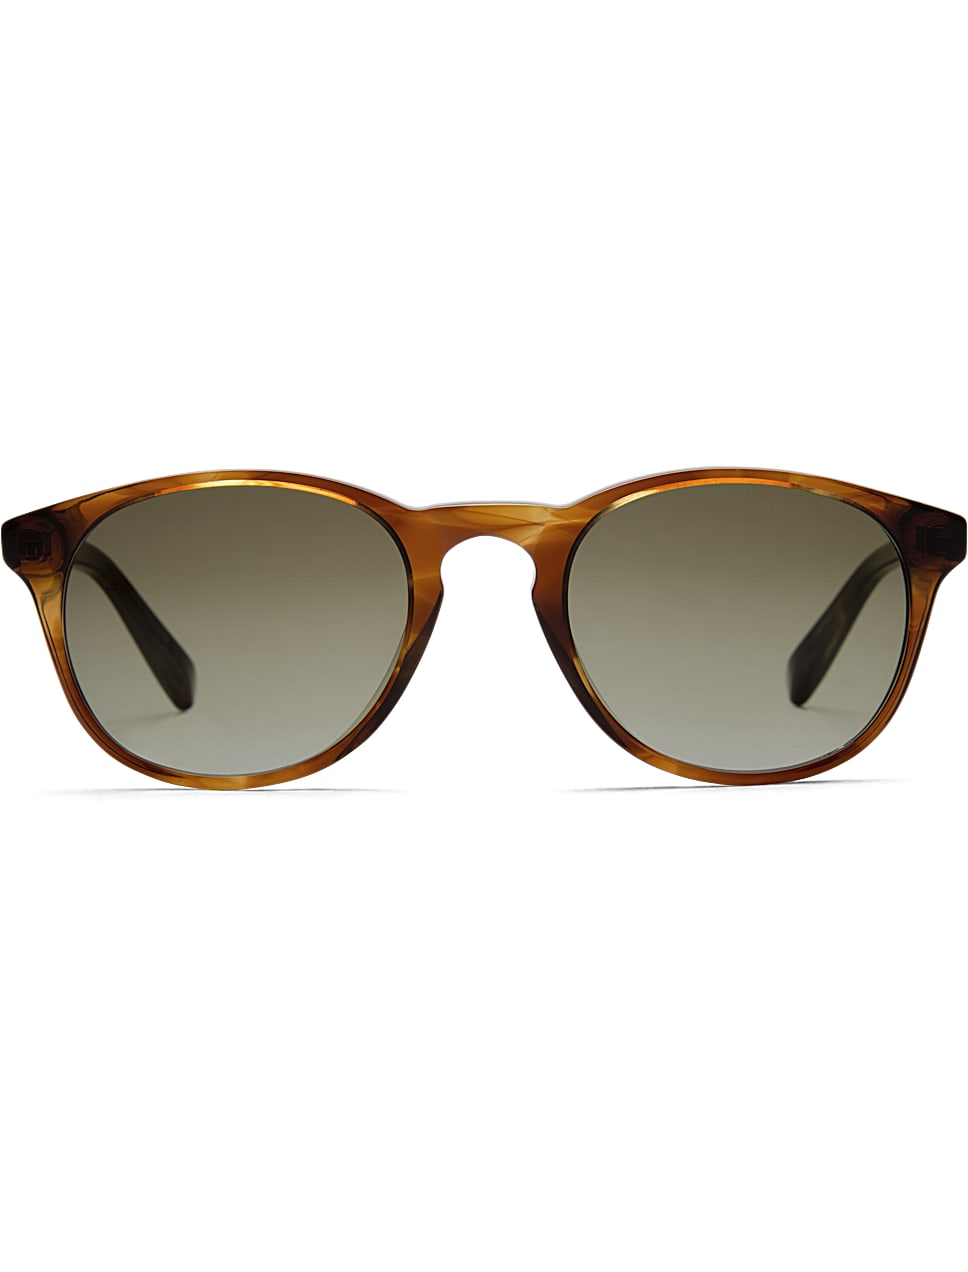 Brown Round Sunglasses Sg0090703 | Suitsupply Online Store